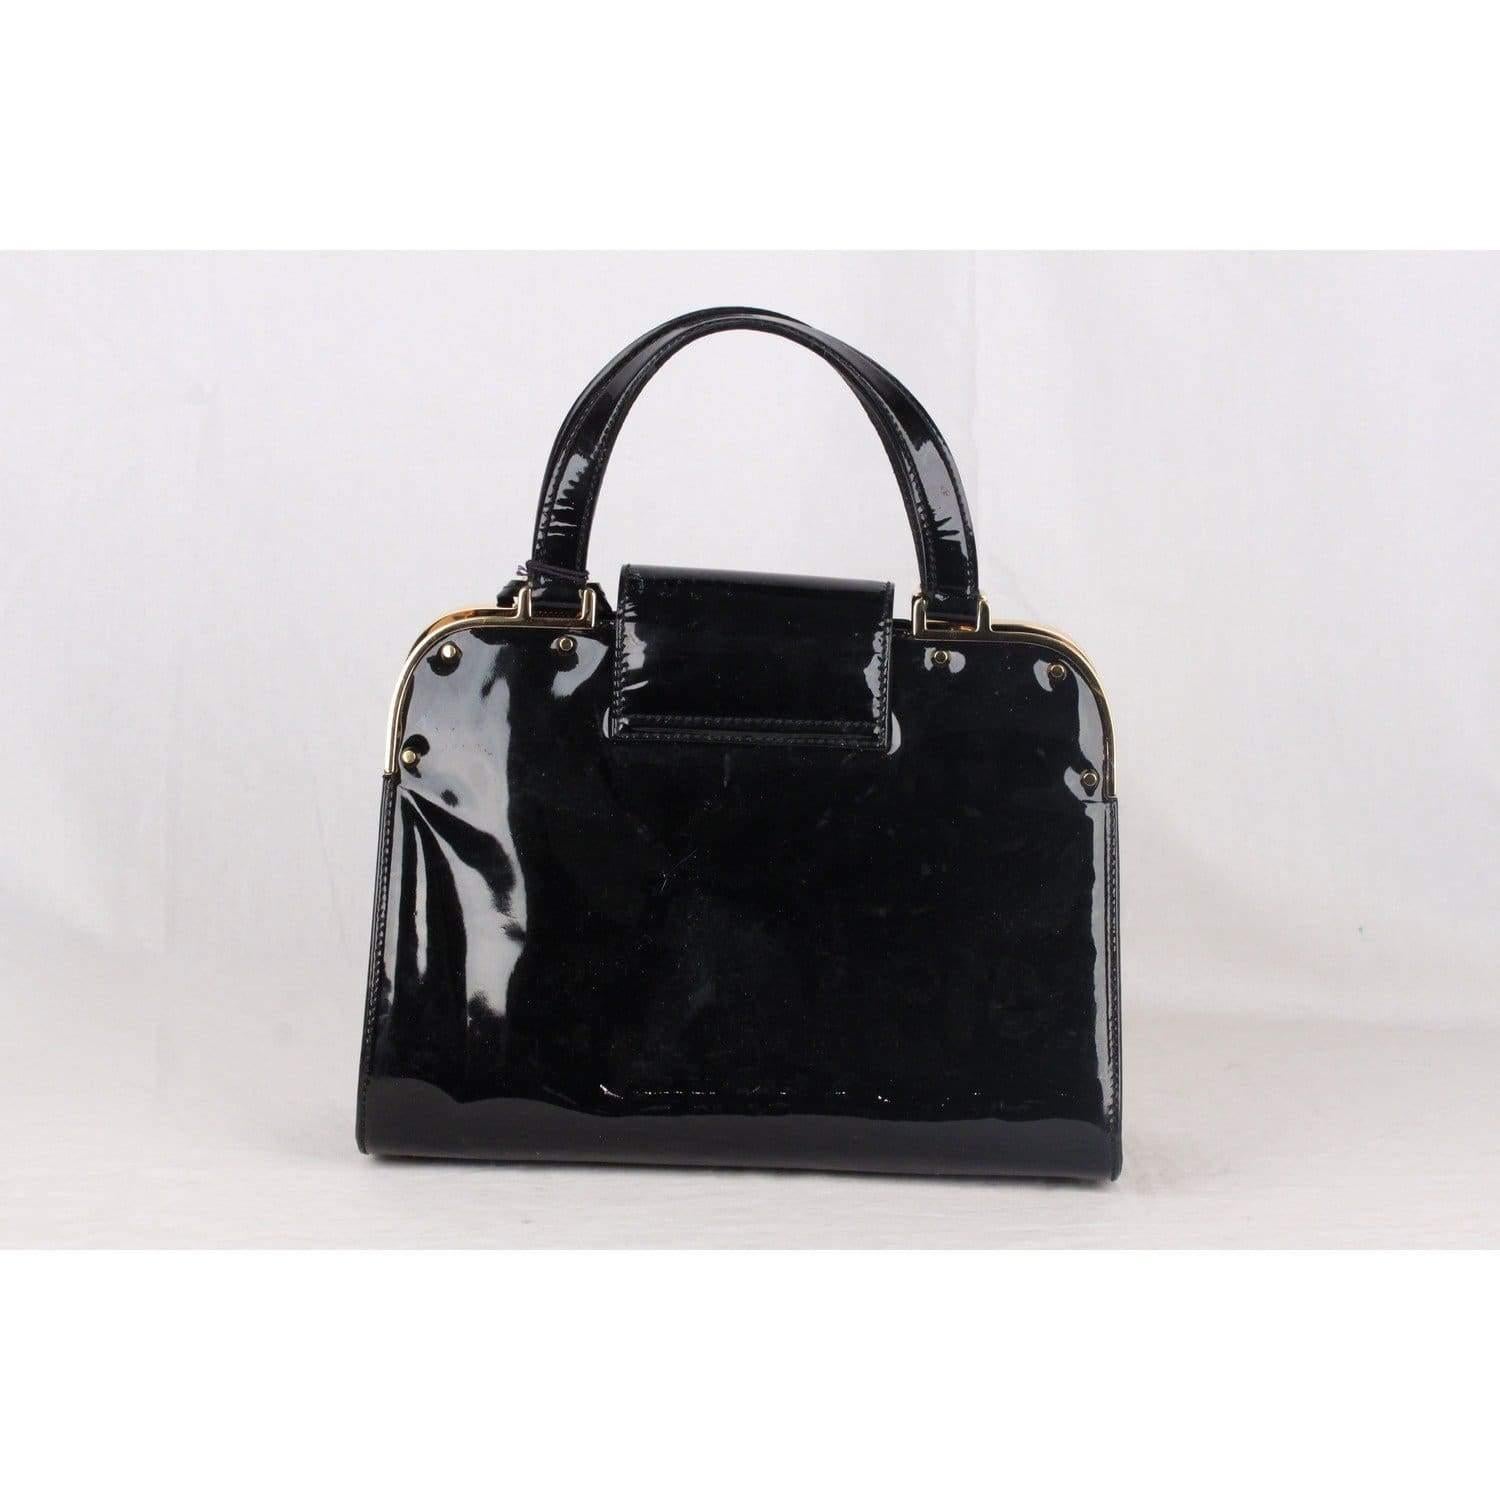 MATERIAL: Patent Leather COLOR: Black MODEL: Satchel GENDER: For Her SIZE: Medium CONDITION RATING: B :GOOD CONDITION - Some light wear of use. CONDITION DETAILS: Some small white spots/marks on the foldover flap, Some white marks/scartches on